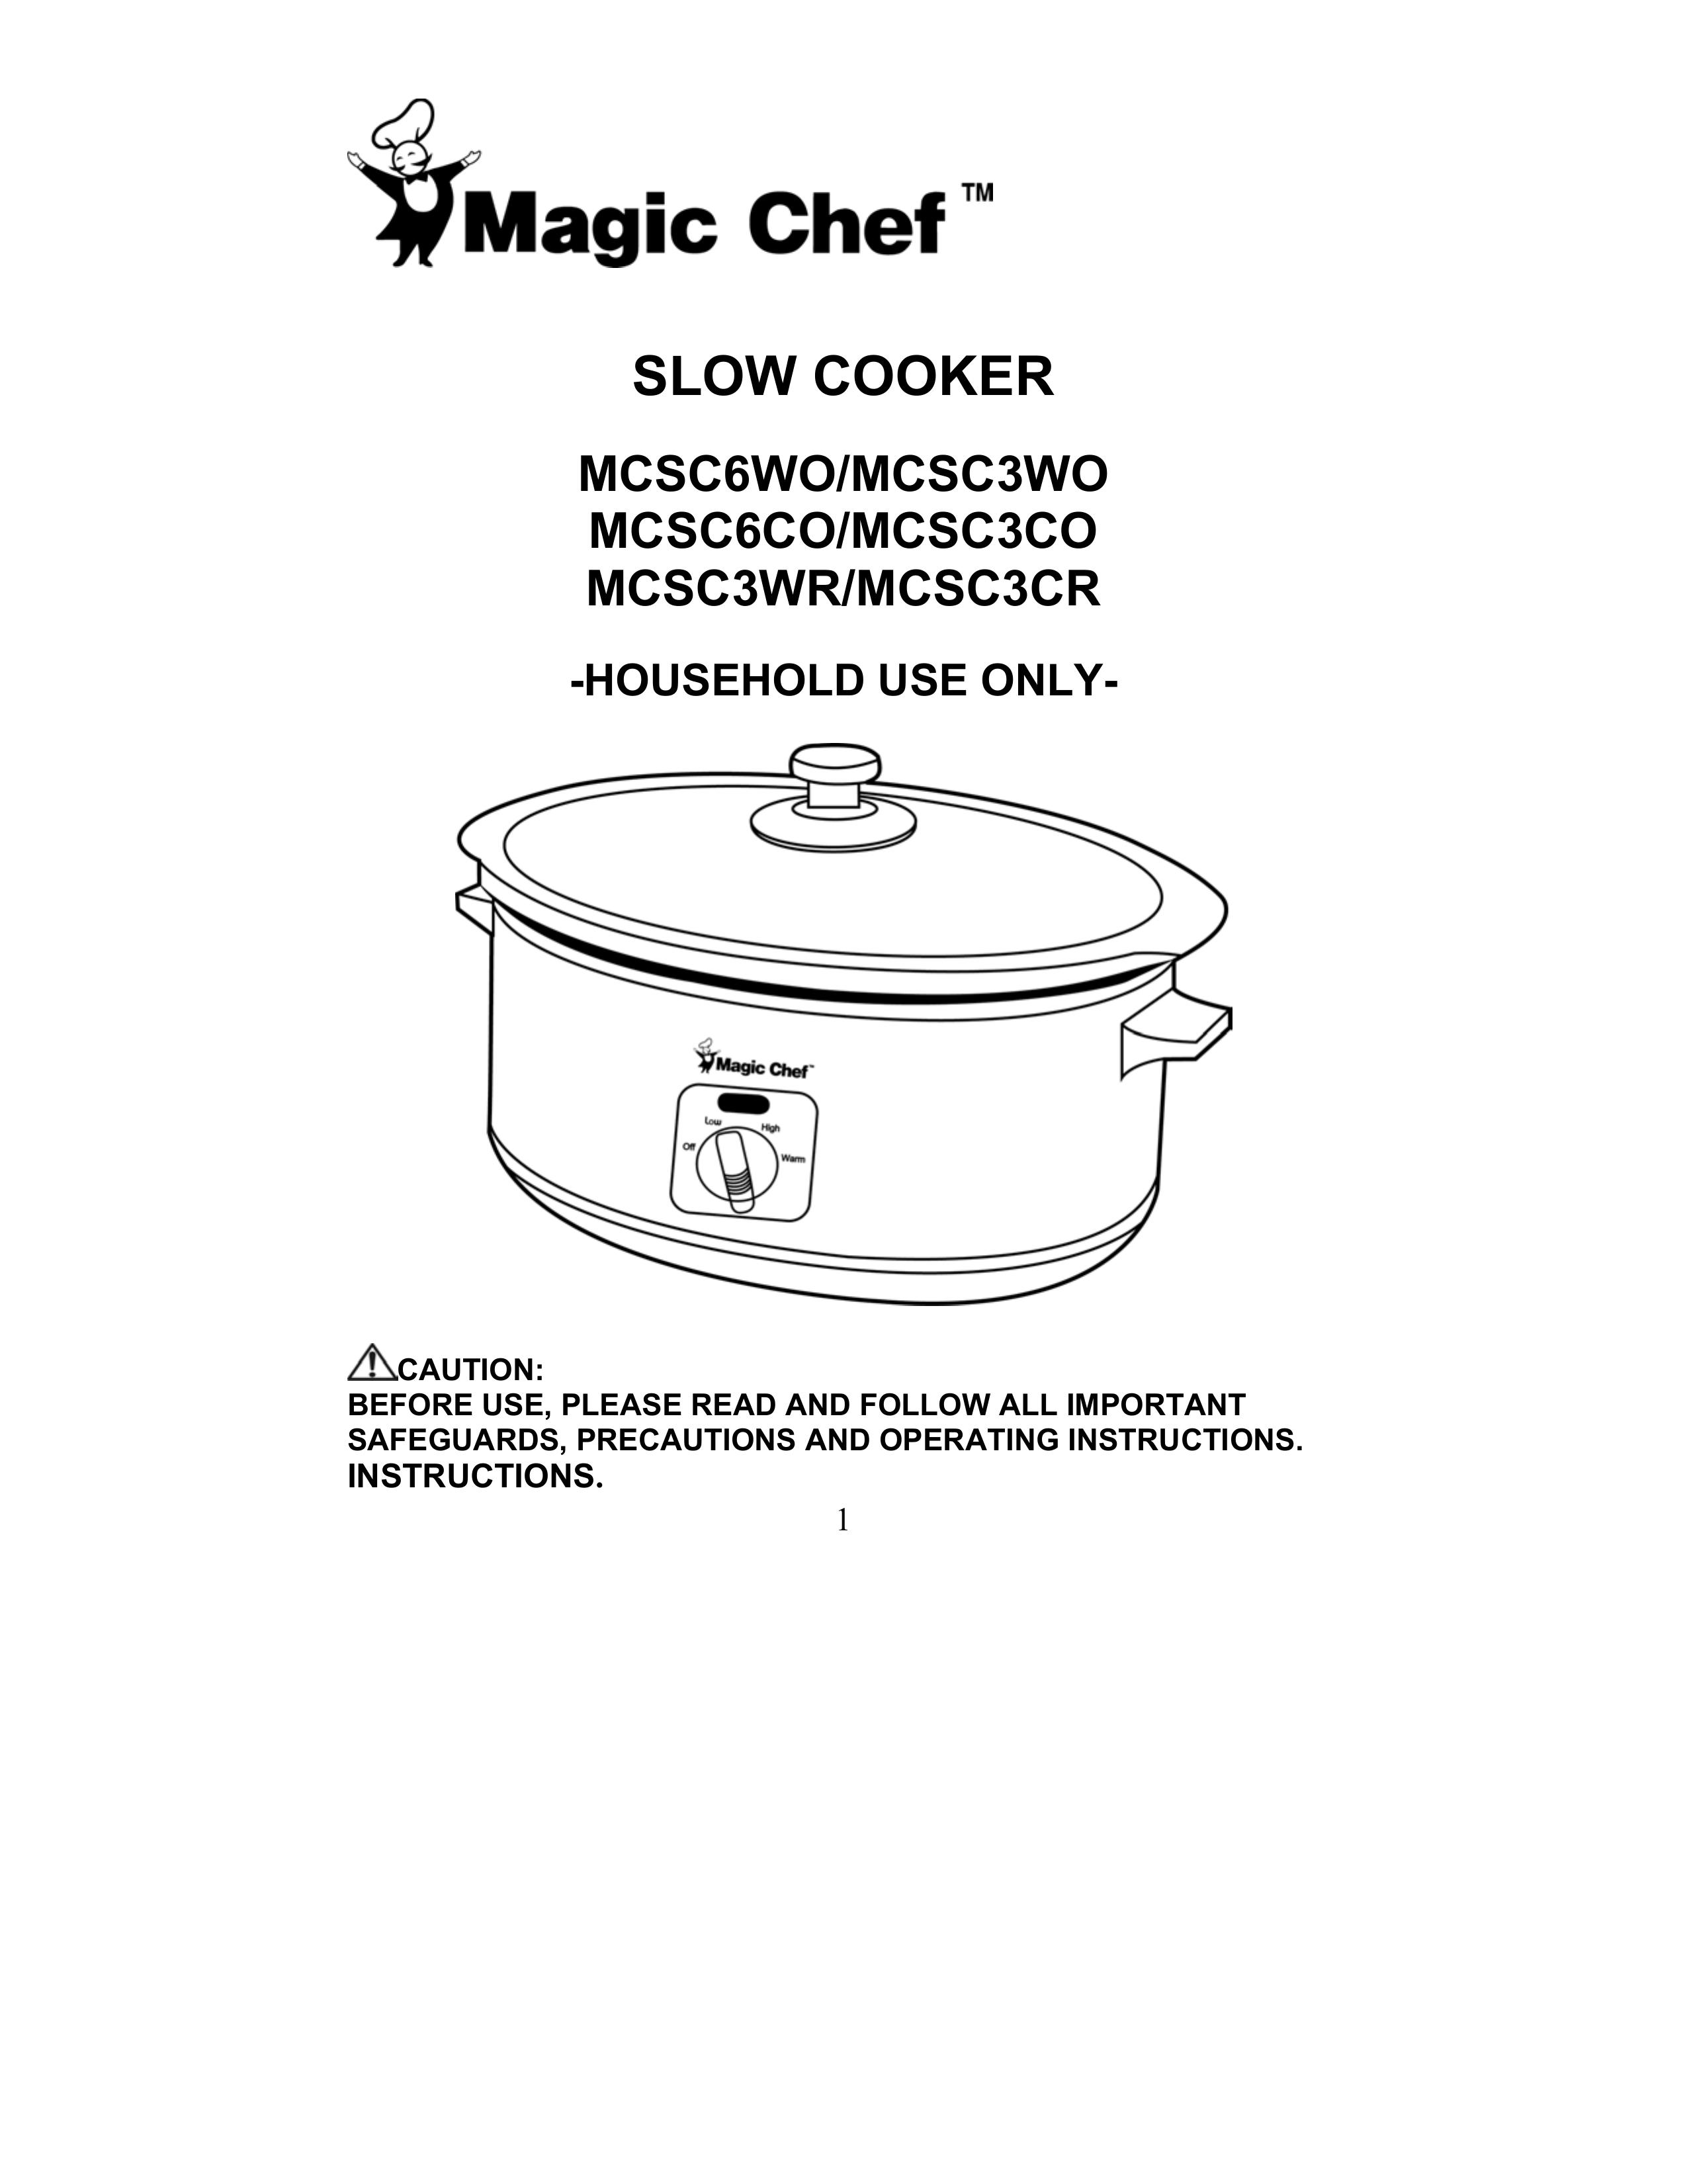 Magic Chef MCSC6WOs Slow Cooker User Manual